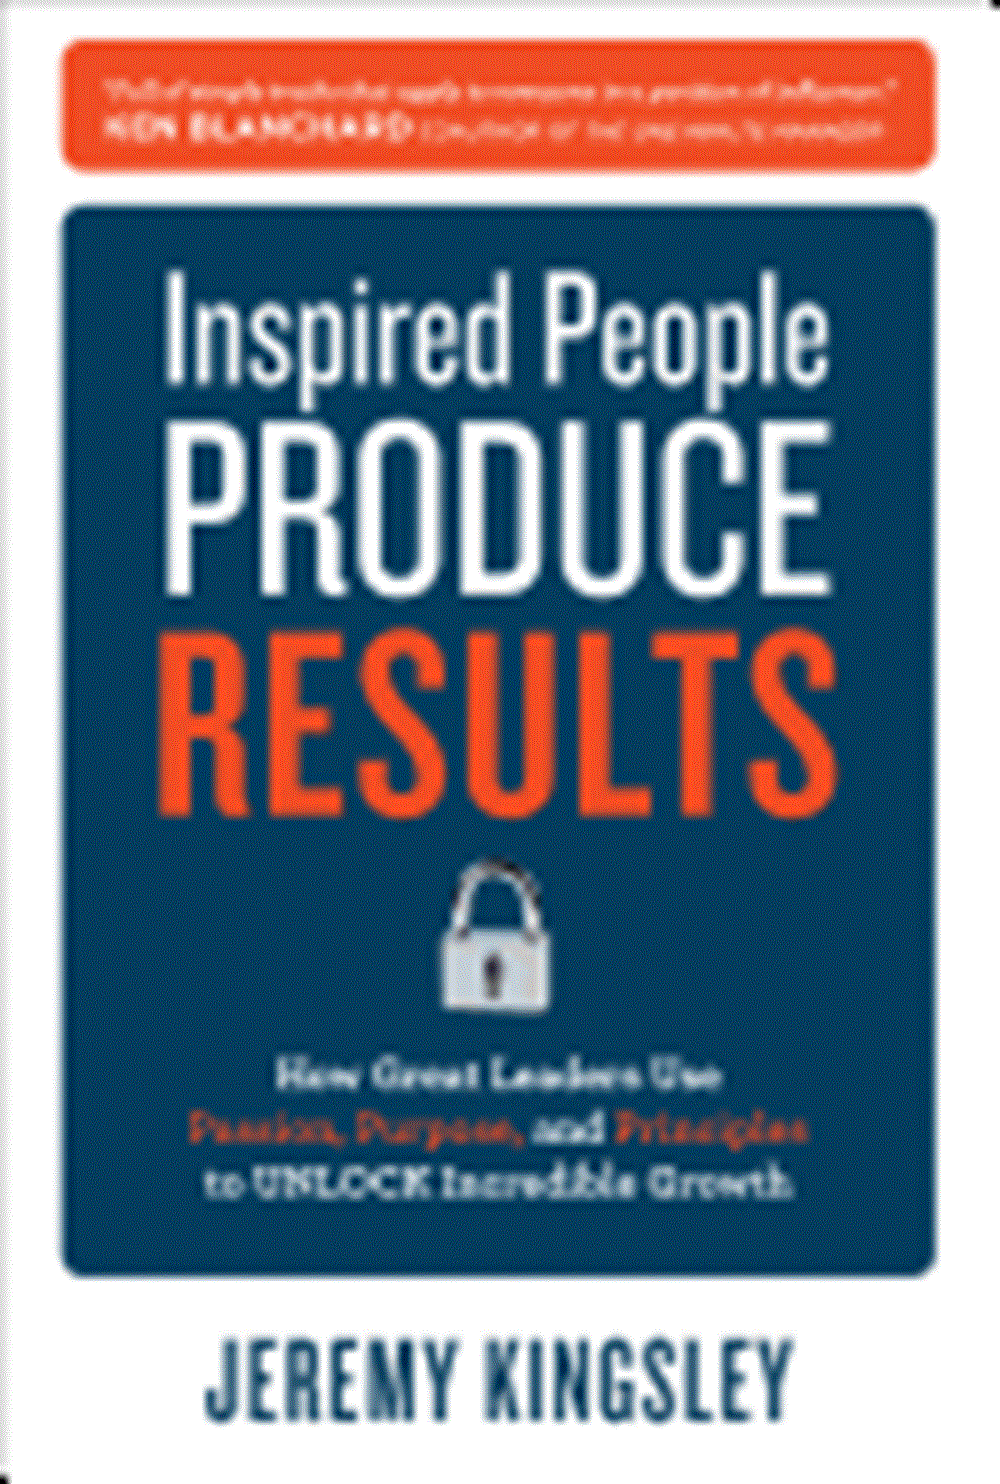 Inspired People Produce Results How Great Leaders Use Passion, Purpose, and Principles to Unlock Inc